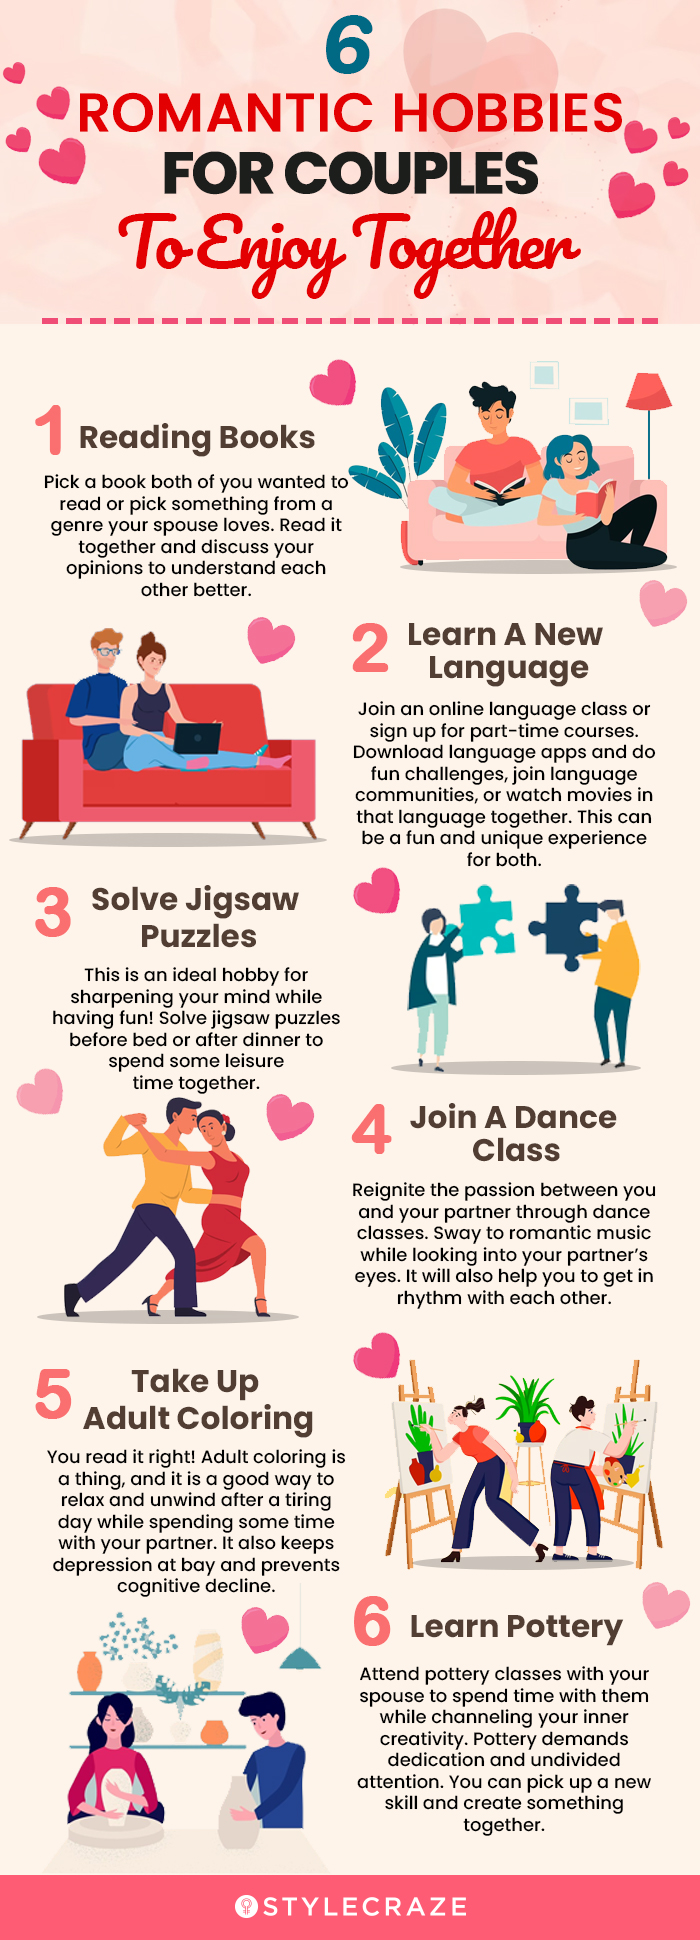 6 romantic hobbies for couples to enjoy together (infographic)